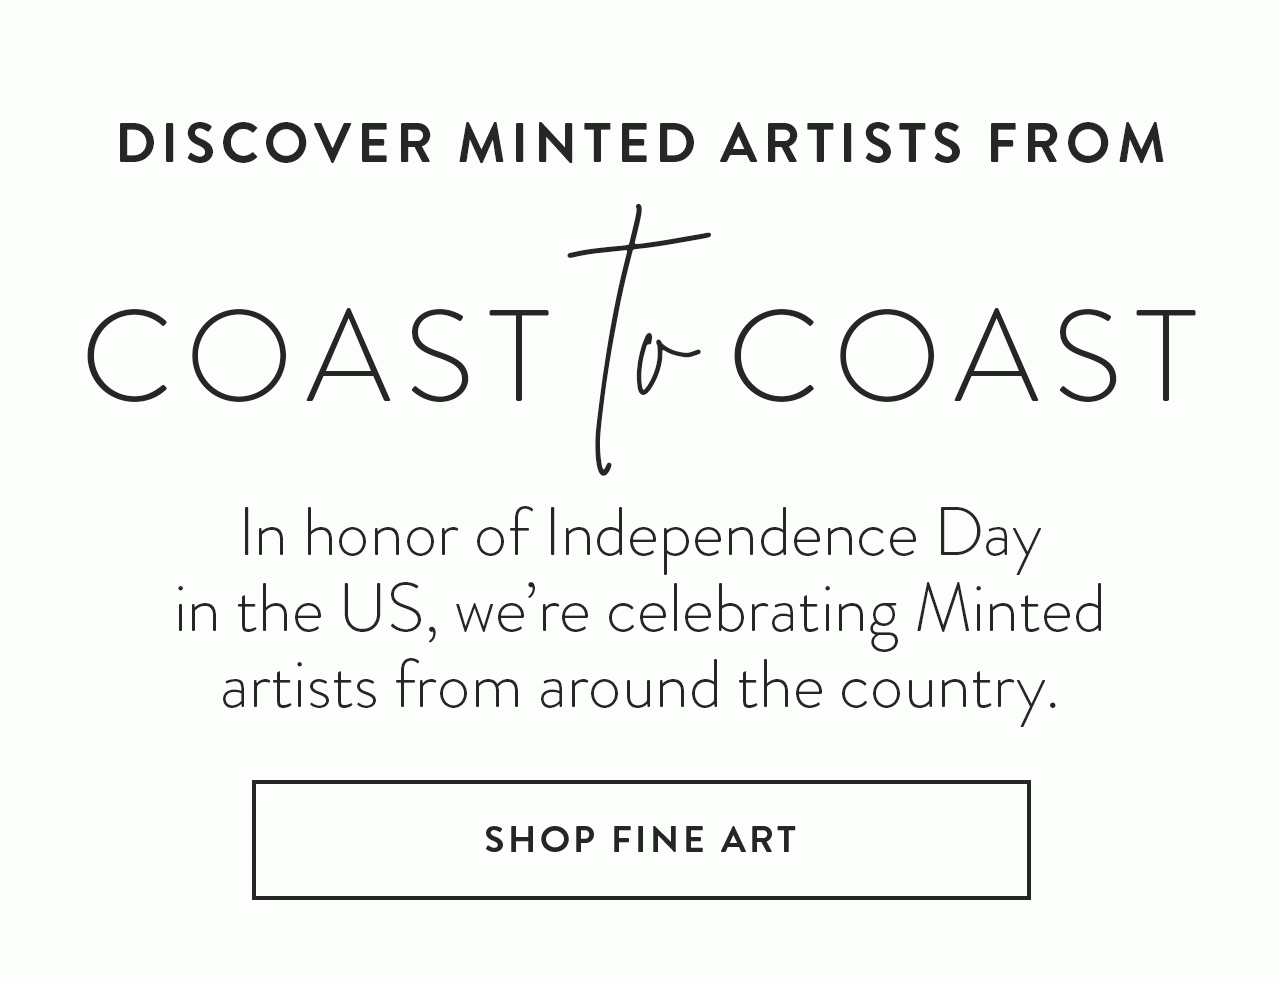 In honor of Independence Day in the US, we’re celebrating Minted artists from around the country.